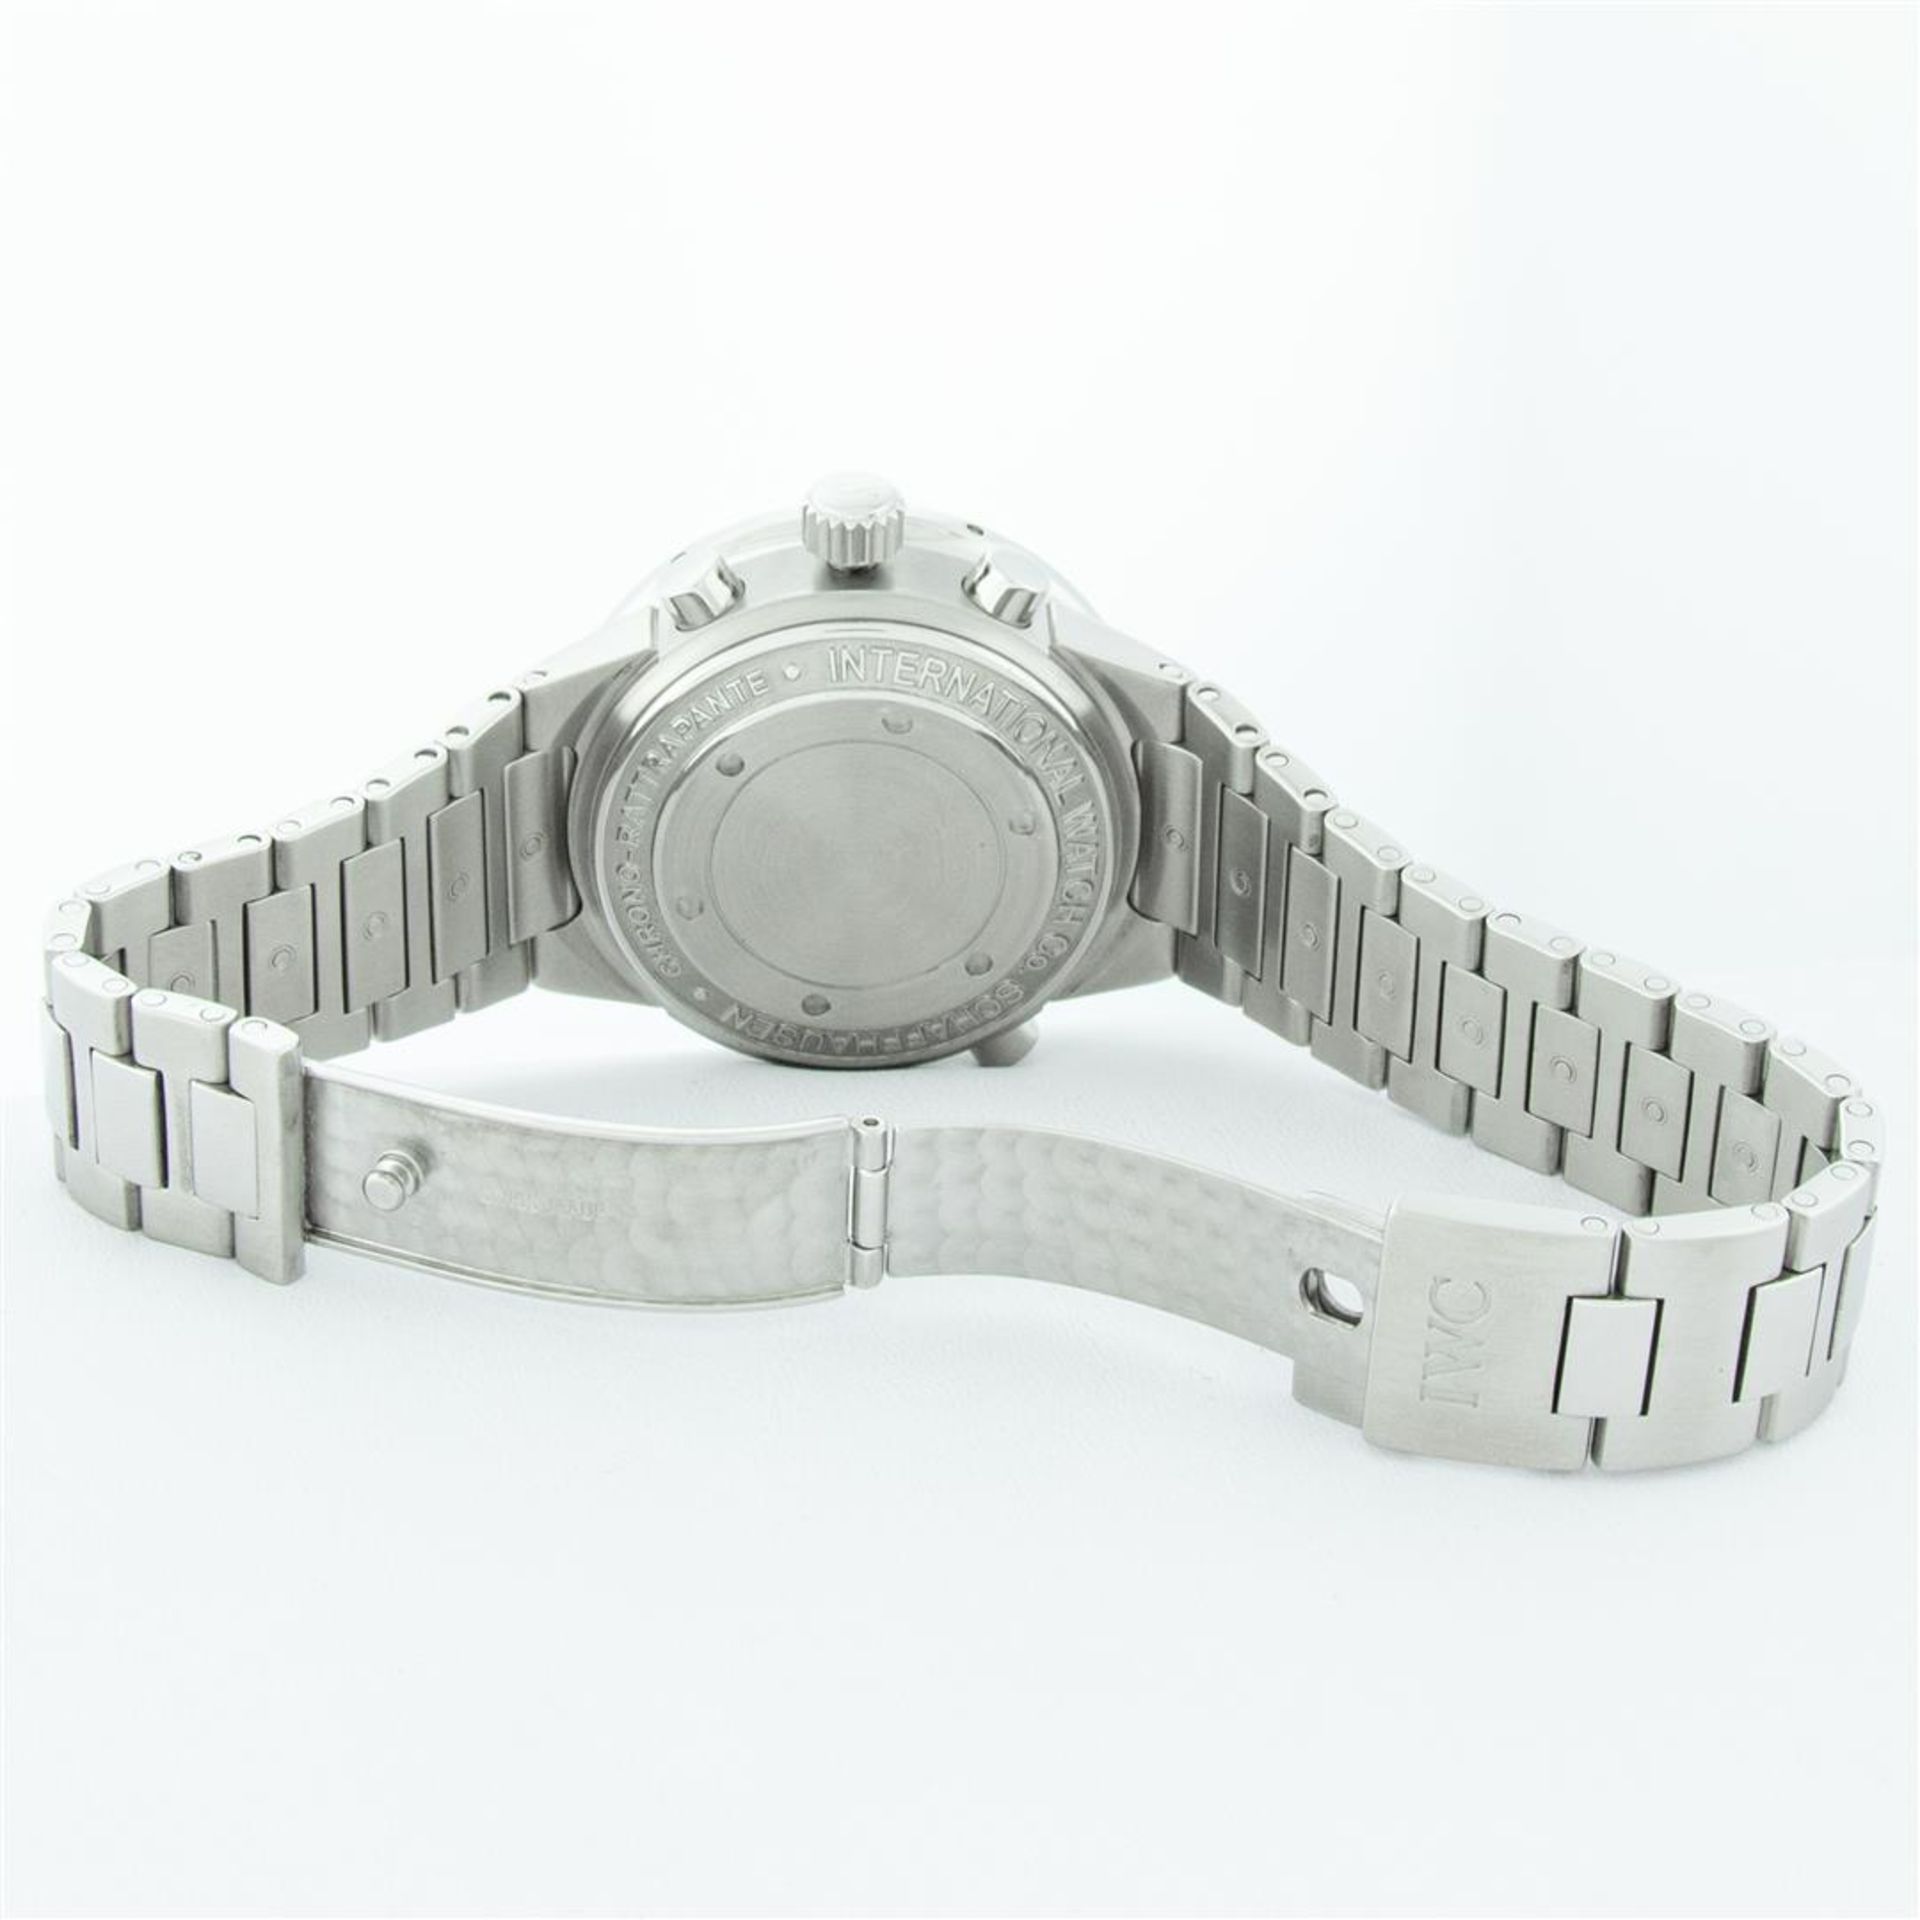 IWC Mens Stainless Steel 43mm GST Rattrapante Split Second Chronograph Wristwatc - Image 6 of 9